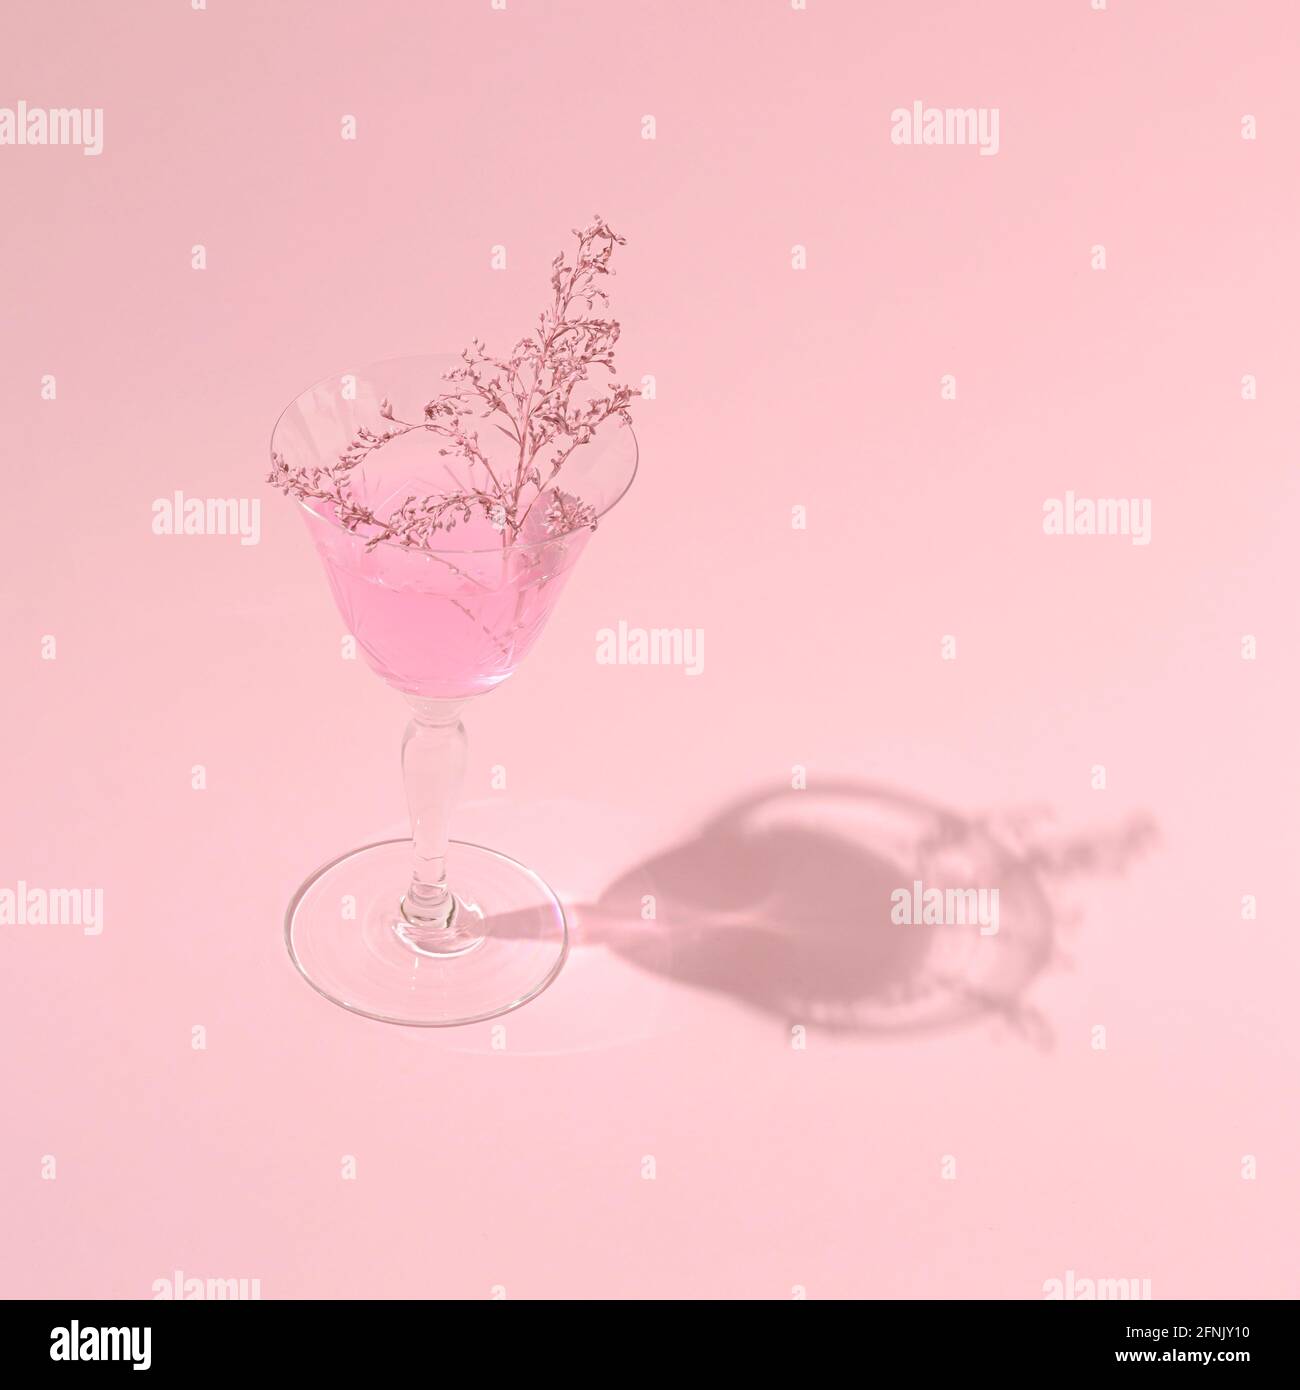 Pink drink with added pink herb in a glass on a light background. Monochromatic colors. Summer party concept Stock Photo